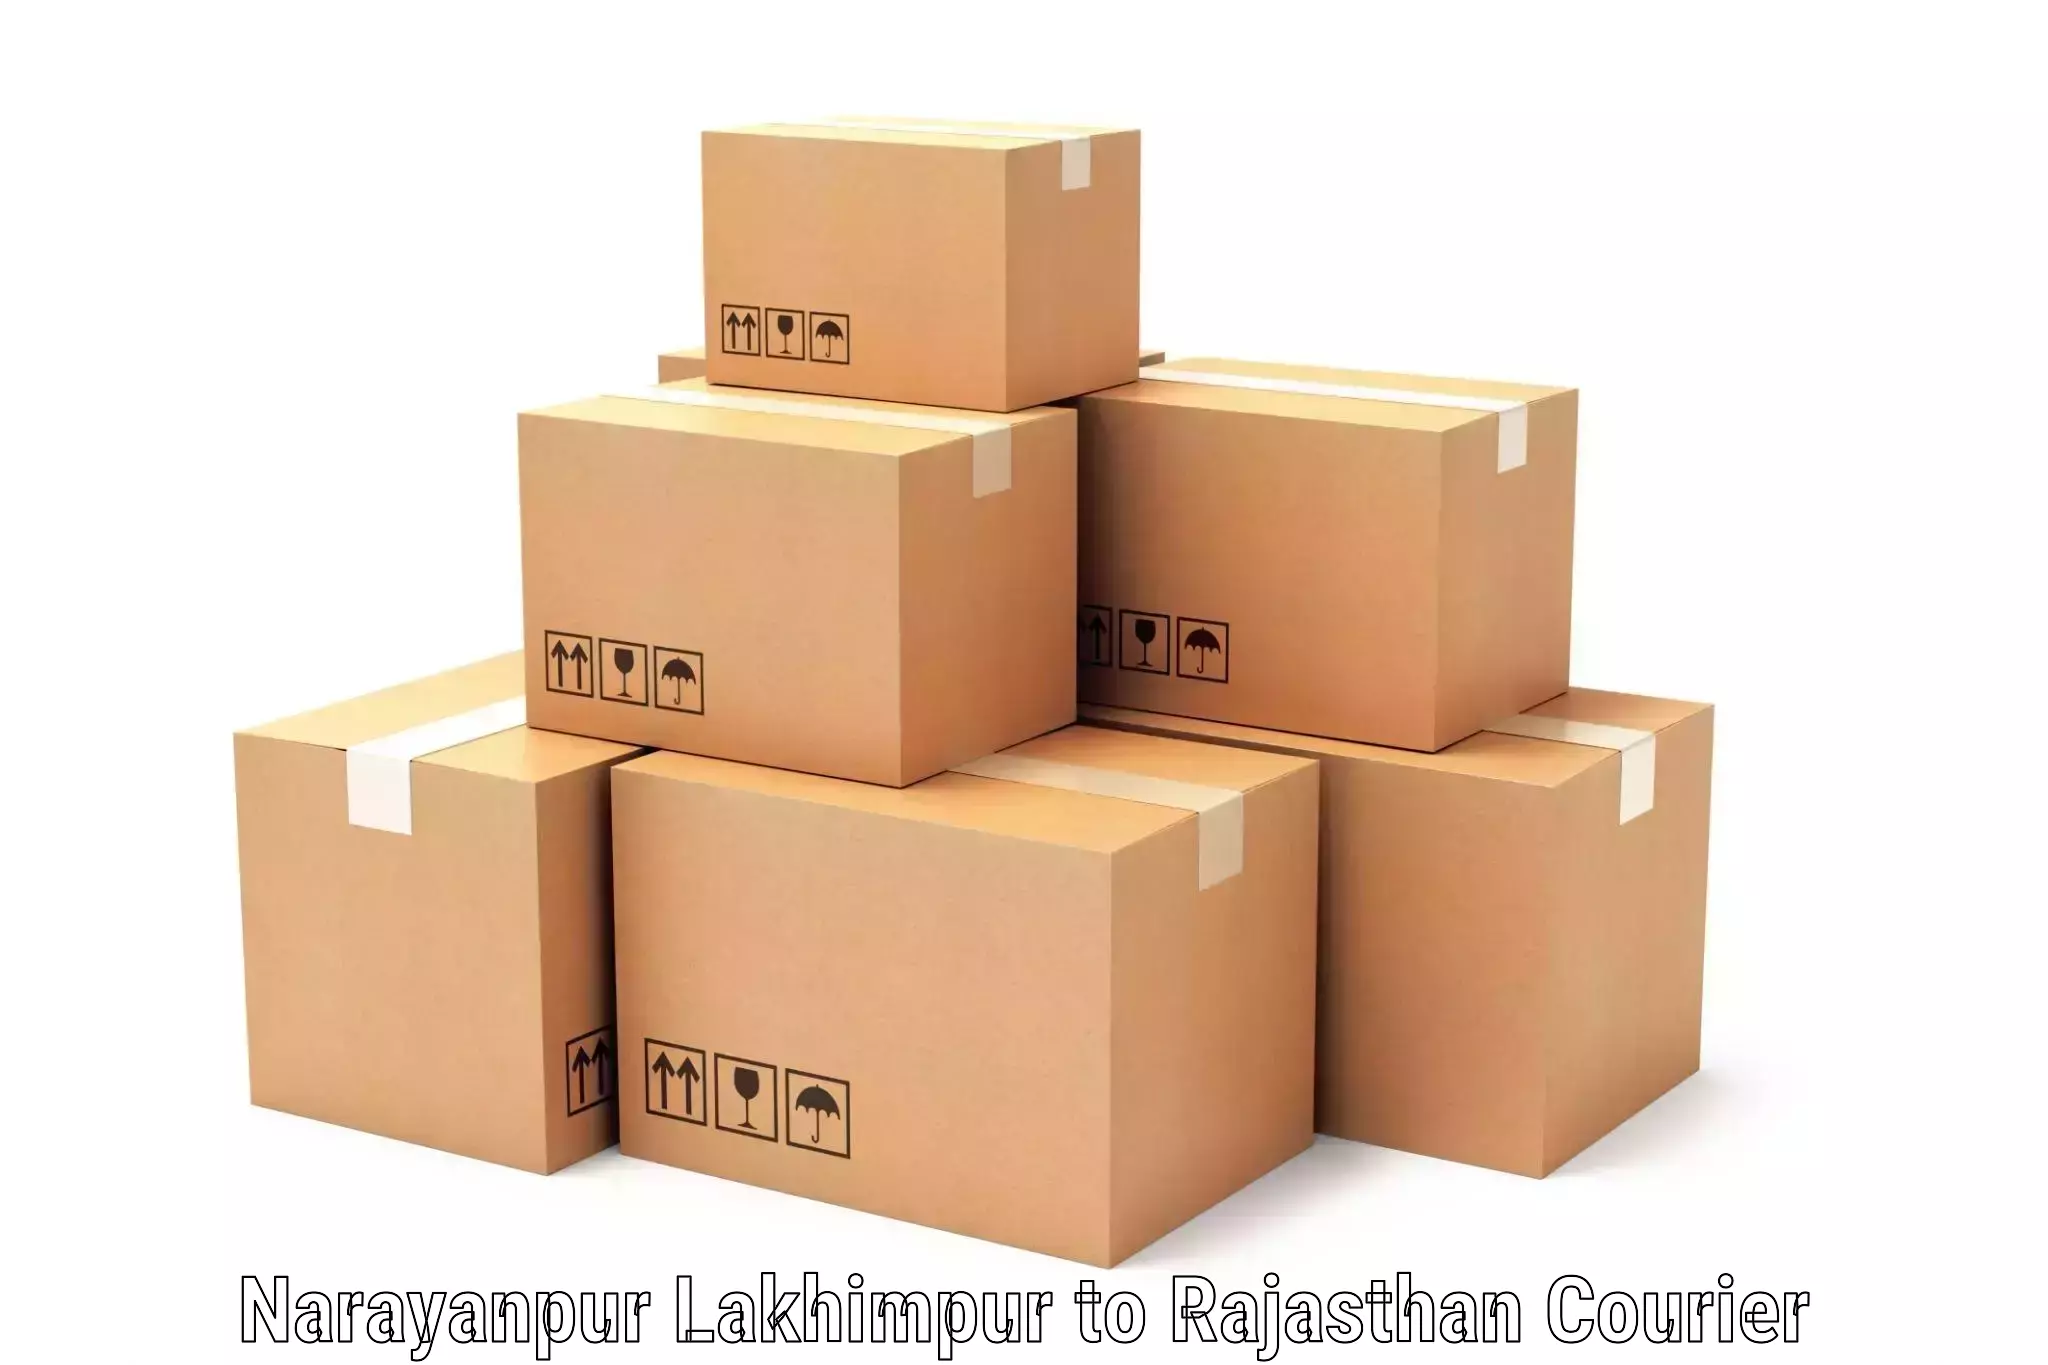 Quality courier services Narayanpur Lakhimpur to Lohawat